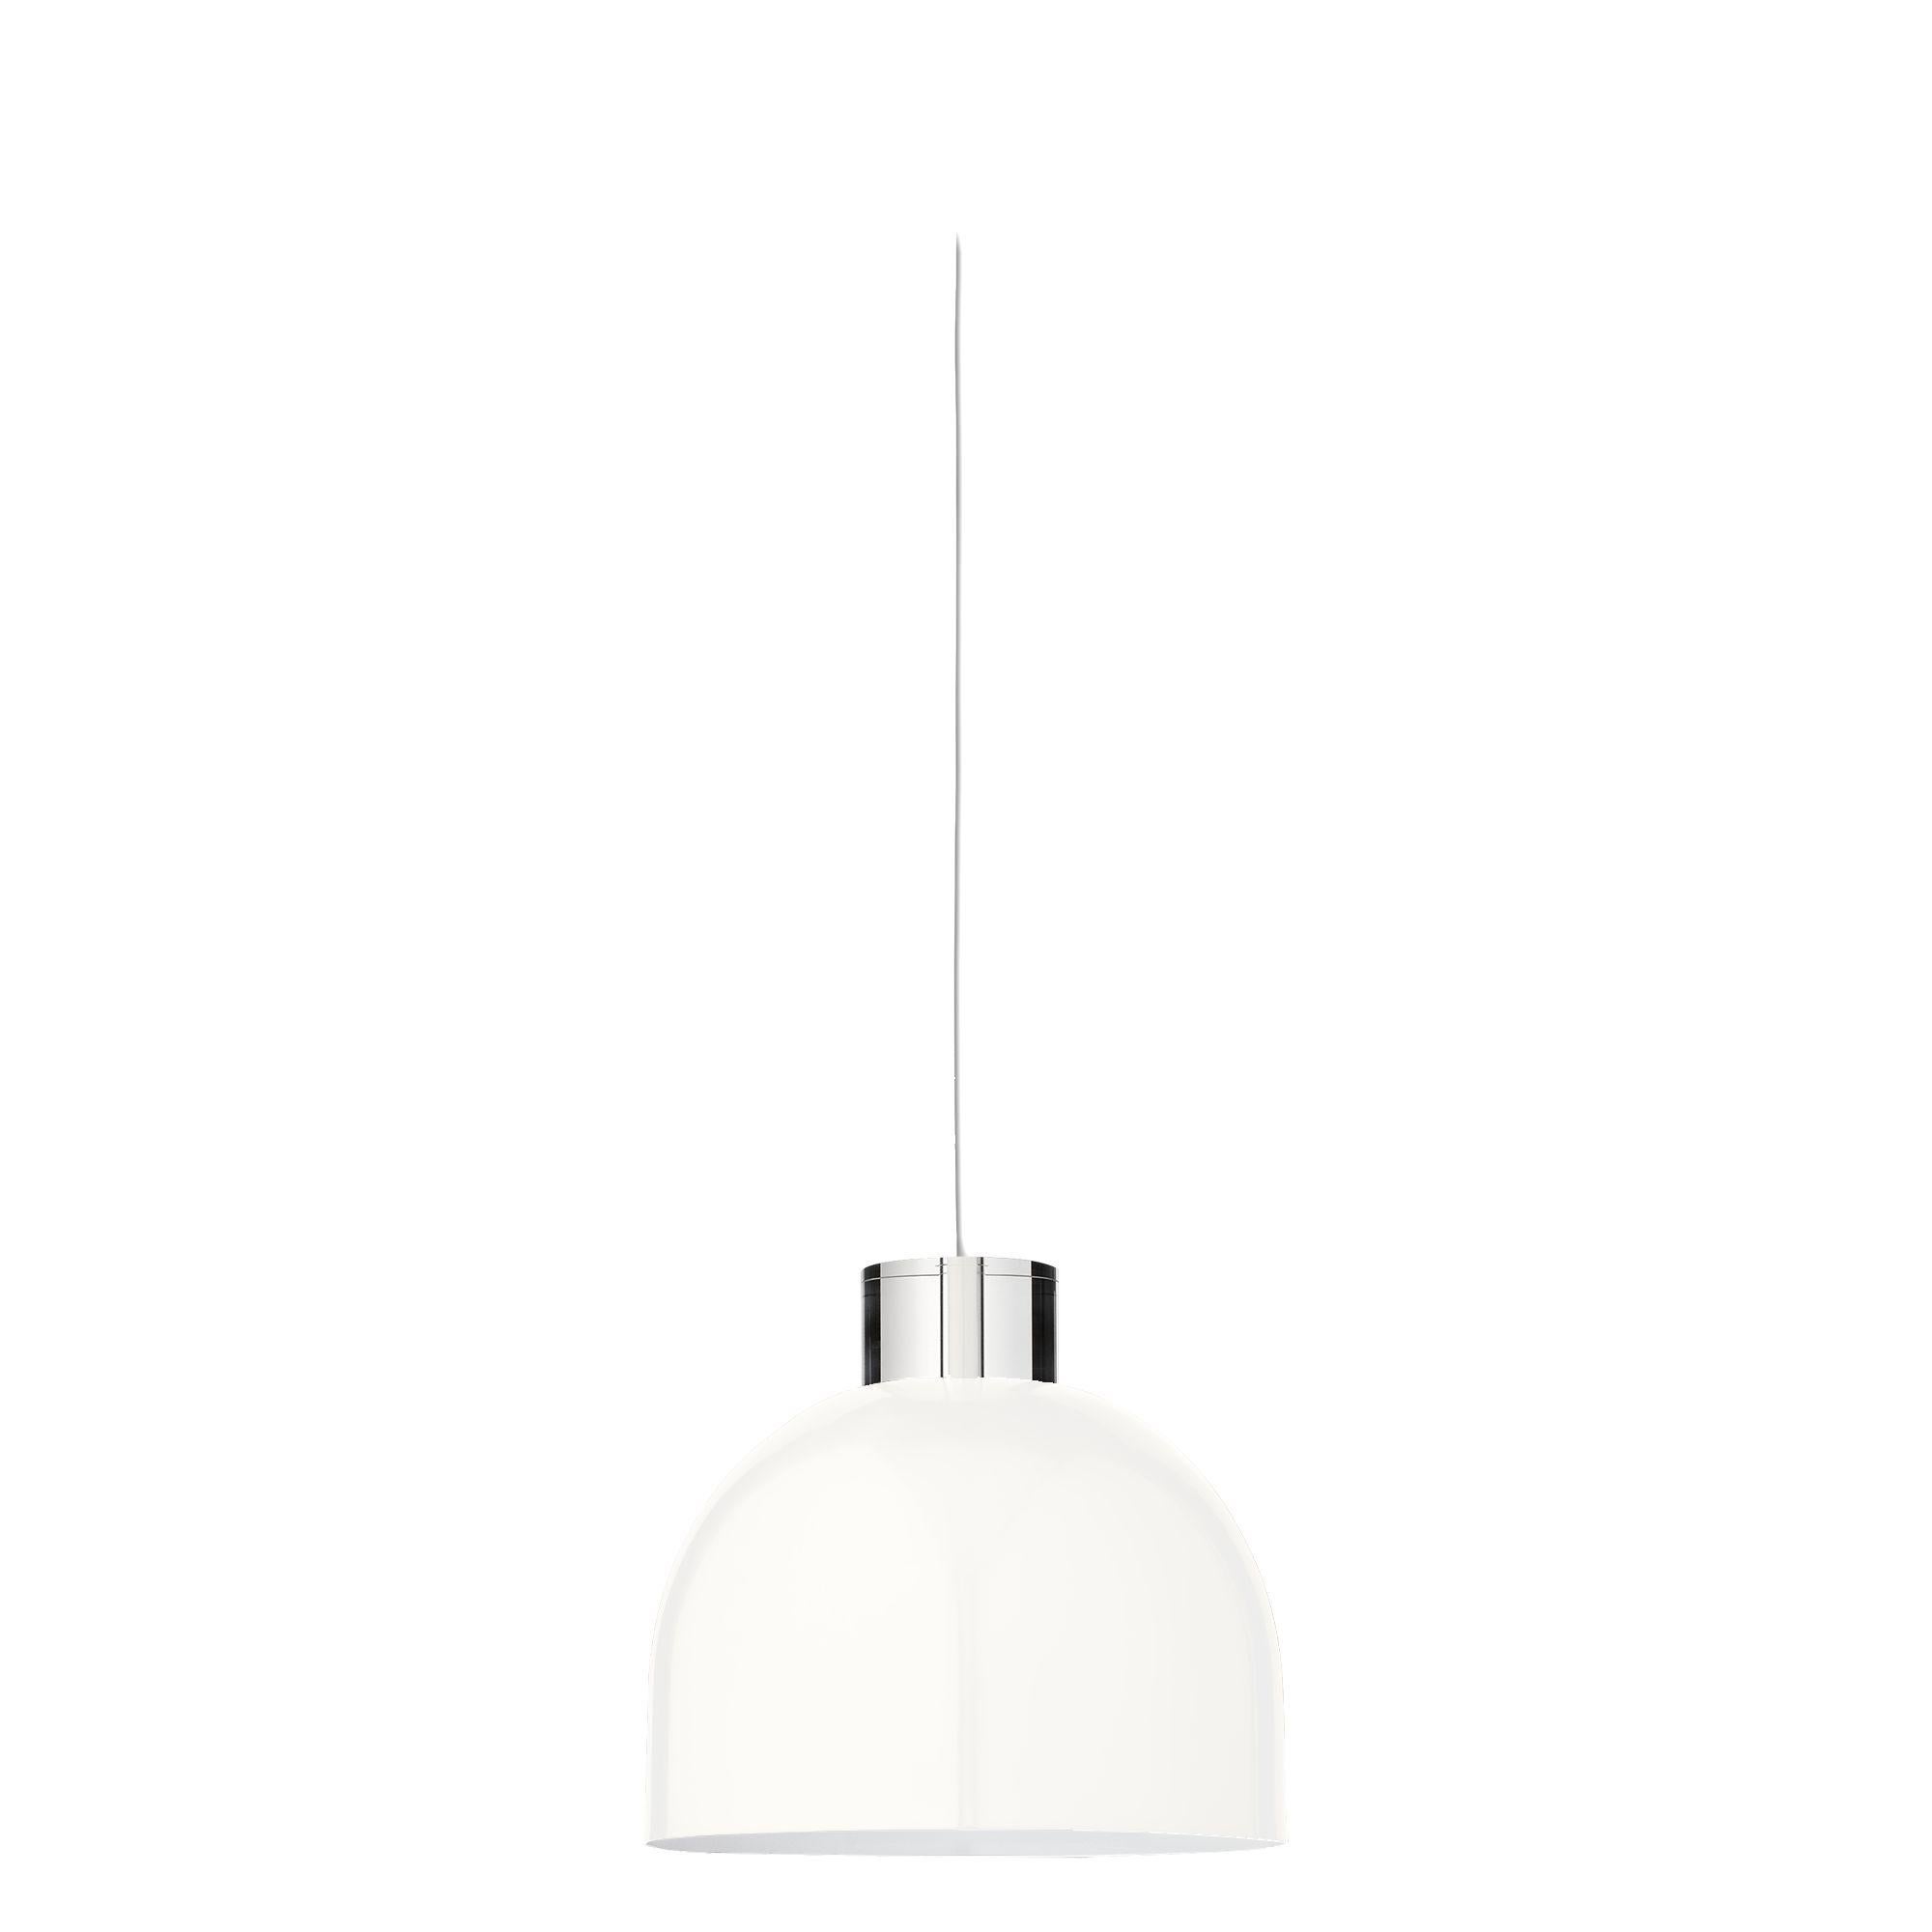 Small white round pendant lamp
Dimensions: Diameter 28 x height 25.5 cm 
Materials: Glass, iron w. brass plating & powder coating.
Details: For all lamps, the recommended light source is E27 max 25W&220/240 voltage. We recommend LED in order to